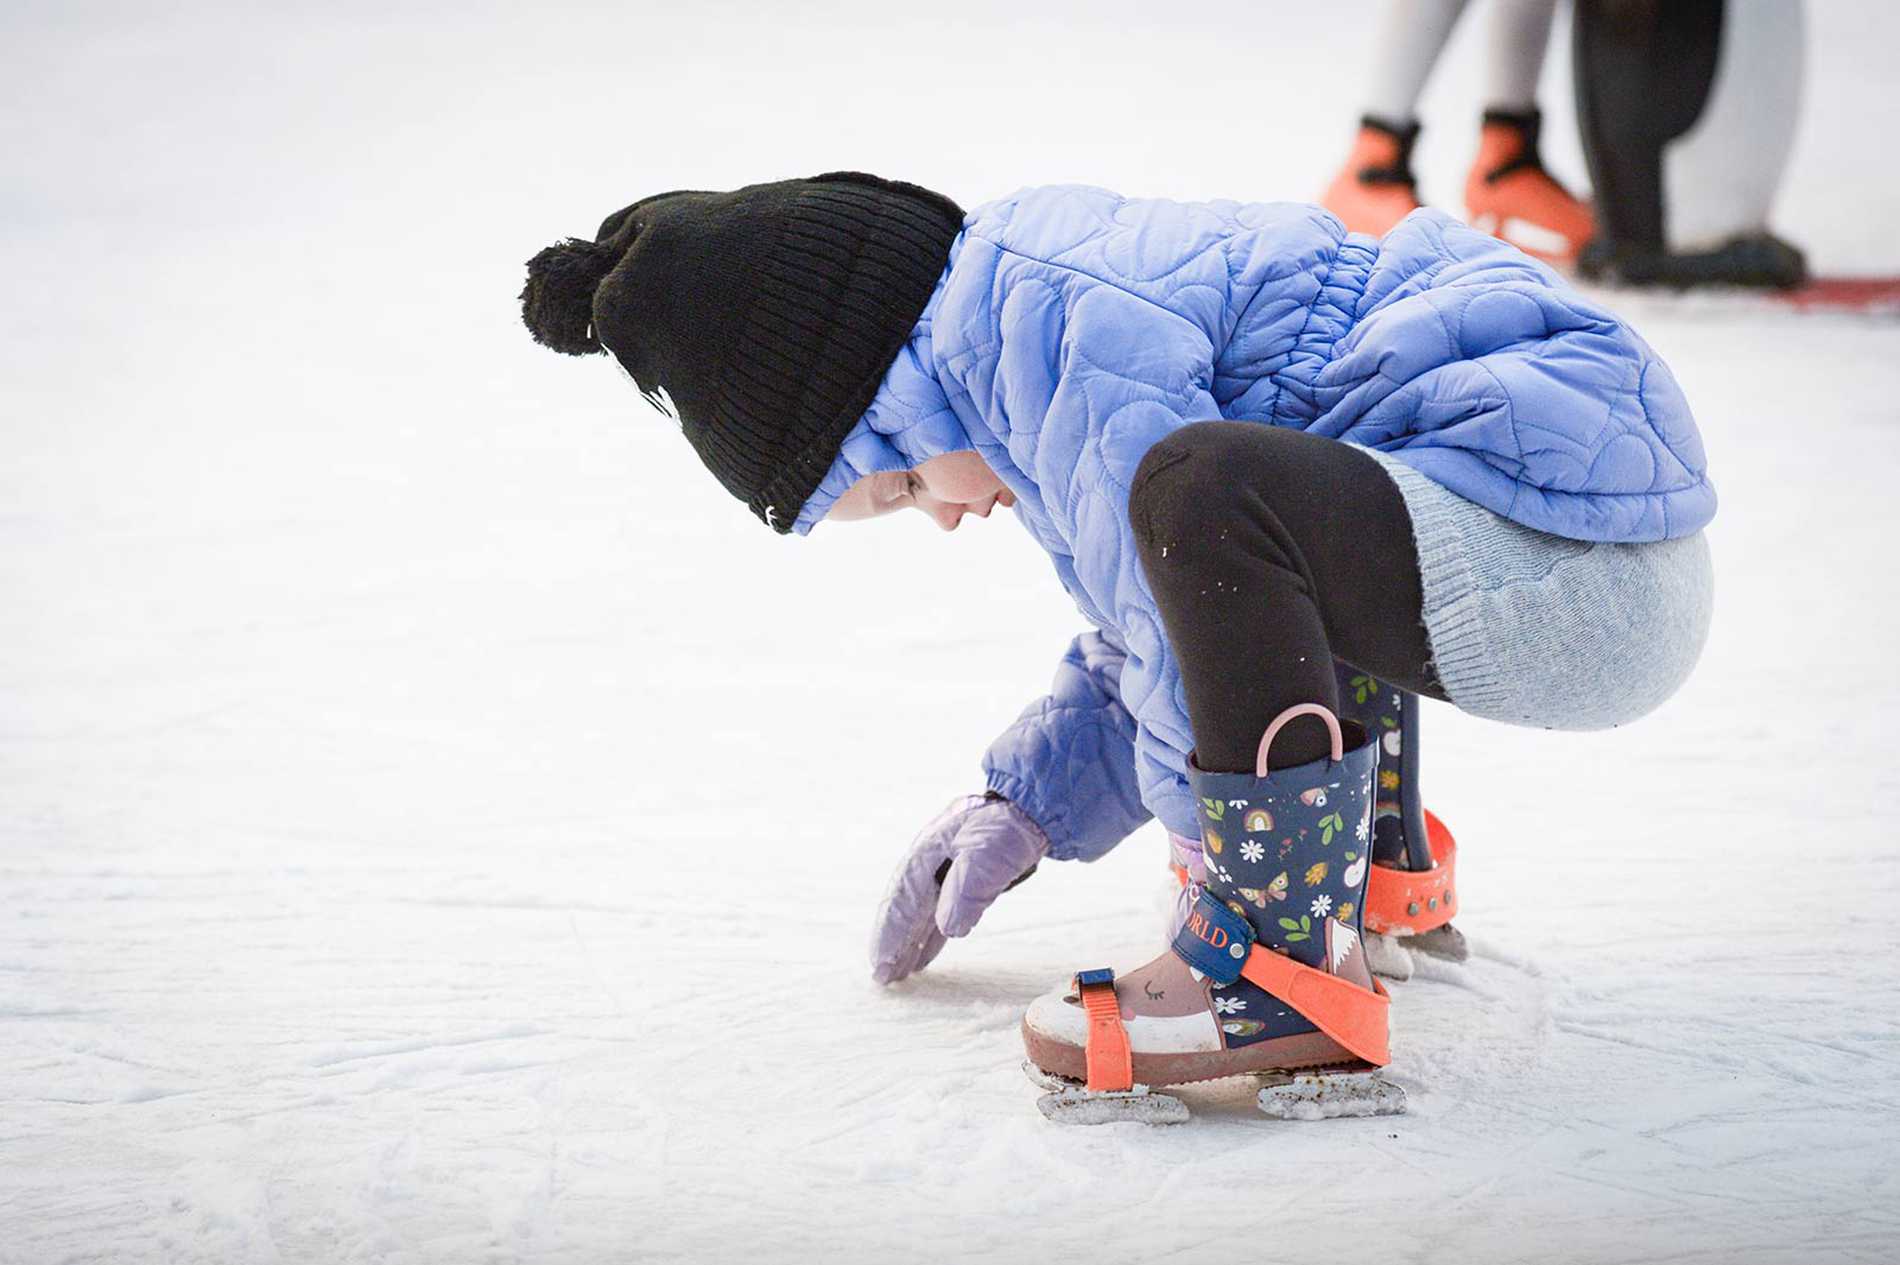 Julia bending down to touch the ice while on the ice rink.